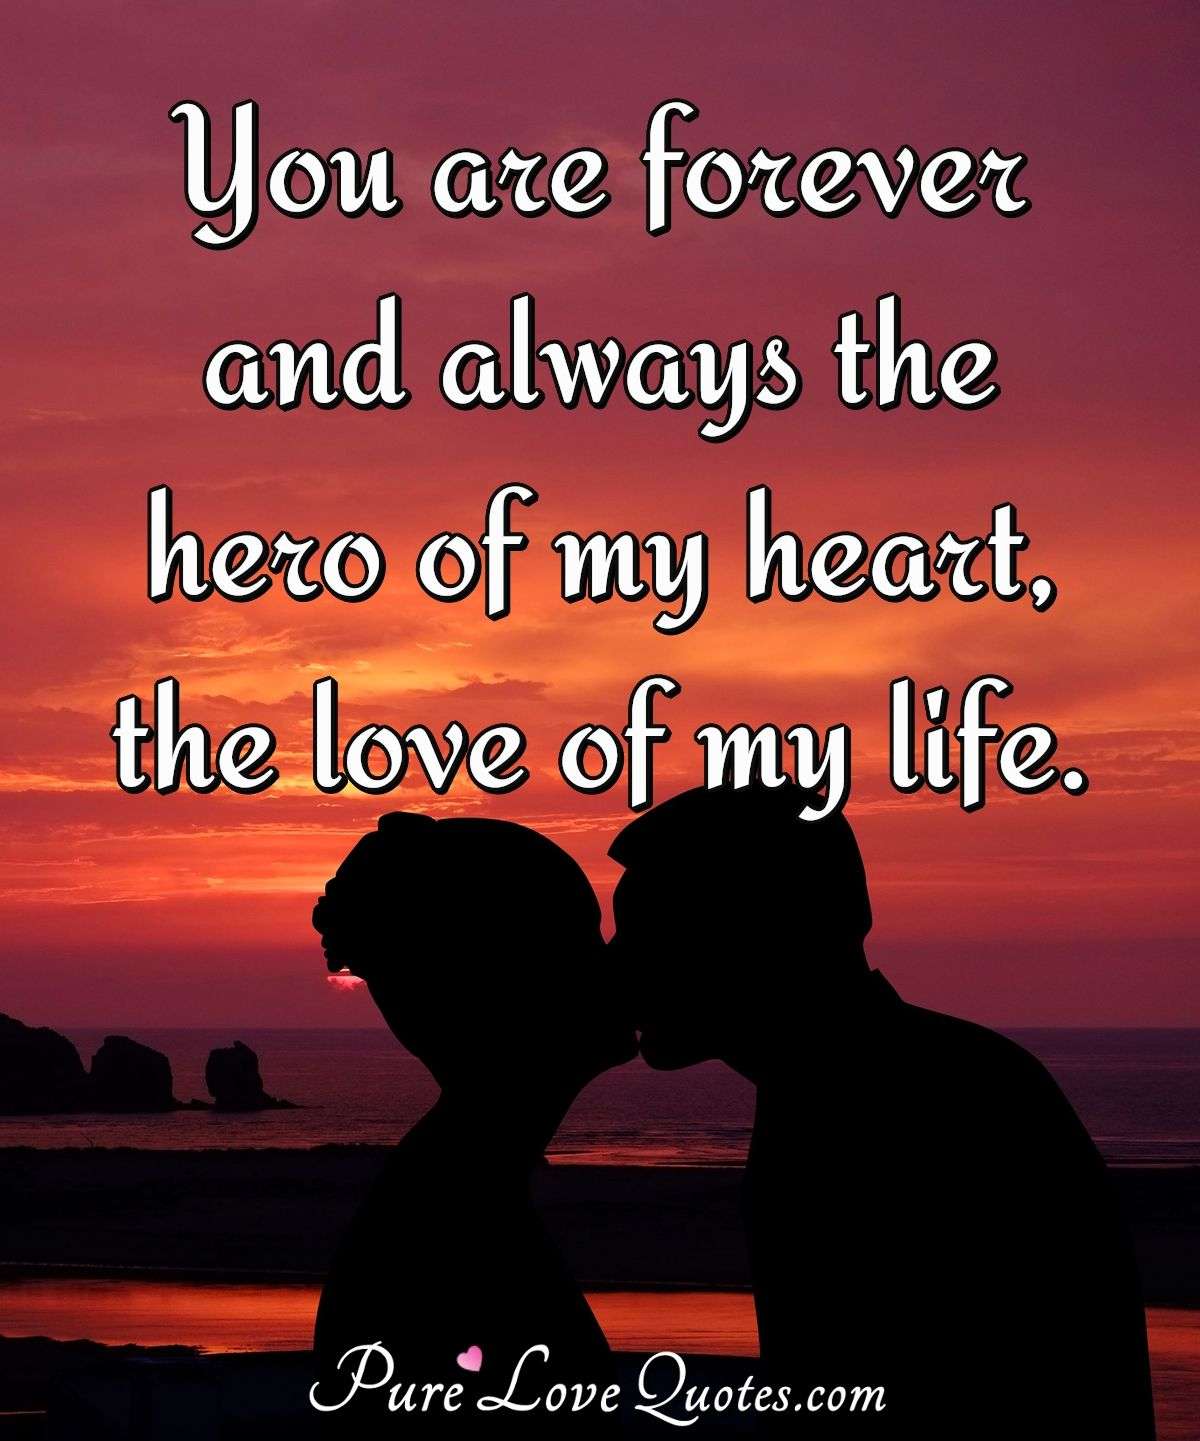 You Are Forever And Always The Hero Of My Heart The Love Of My Life Purelovequotes